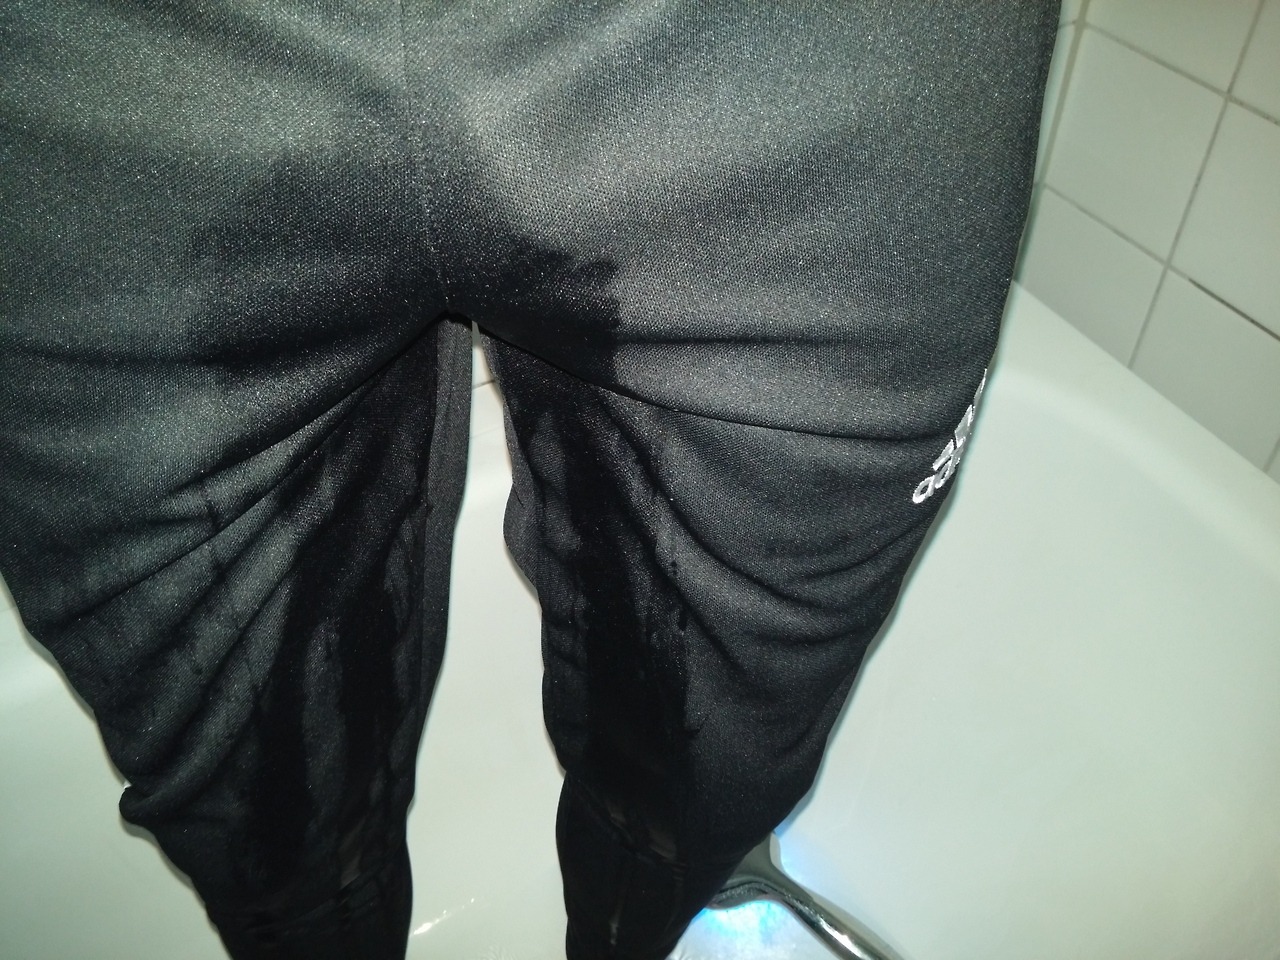 swedishtrackieboy: Some old piss pics :) Will be recording a video of me pissing